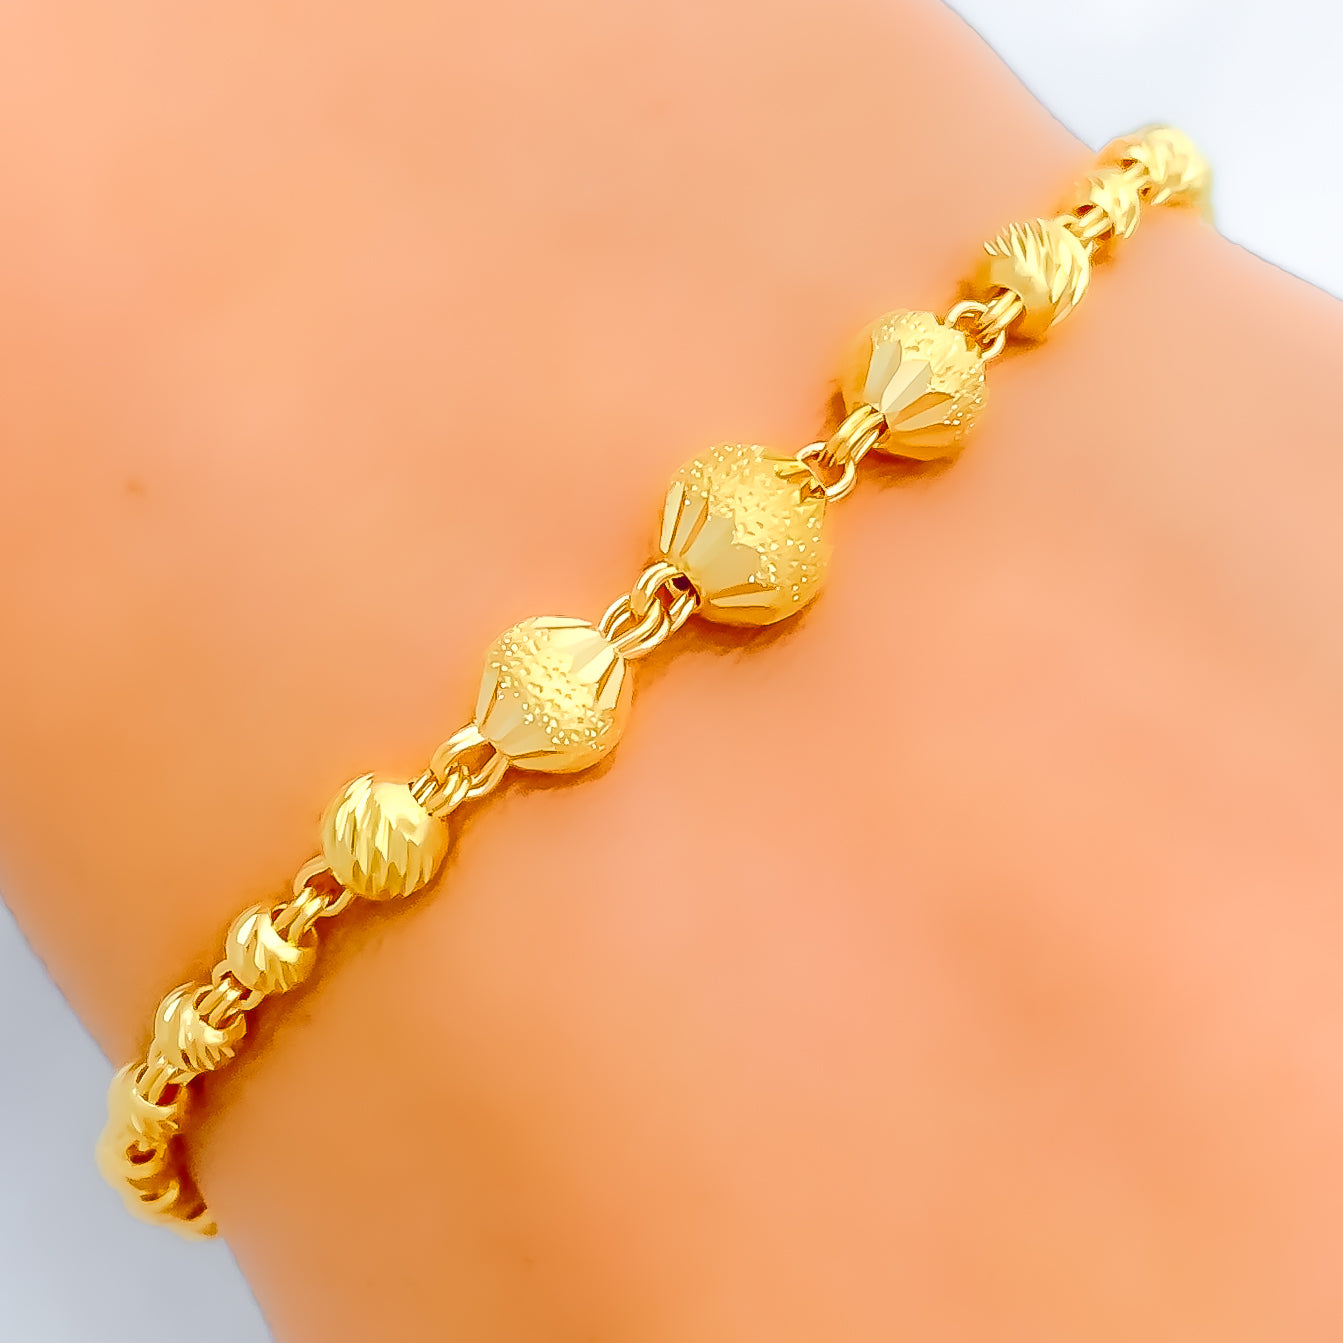 Chinese Word Cai Watch Link 24k Gold Bracelet 24K Gold Plated Lucky  Birthday Anniversary Wedding Jewelry Gift For Women And Men From  Zachlavine, $7.37 | DHgate.Com